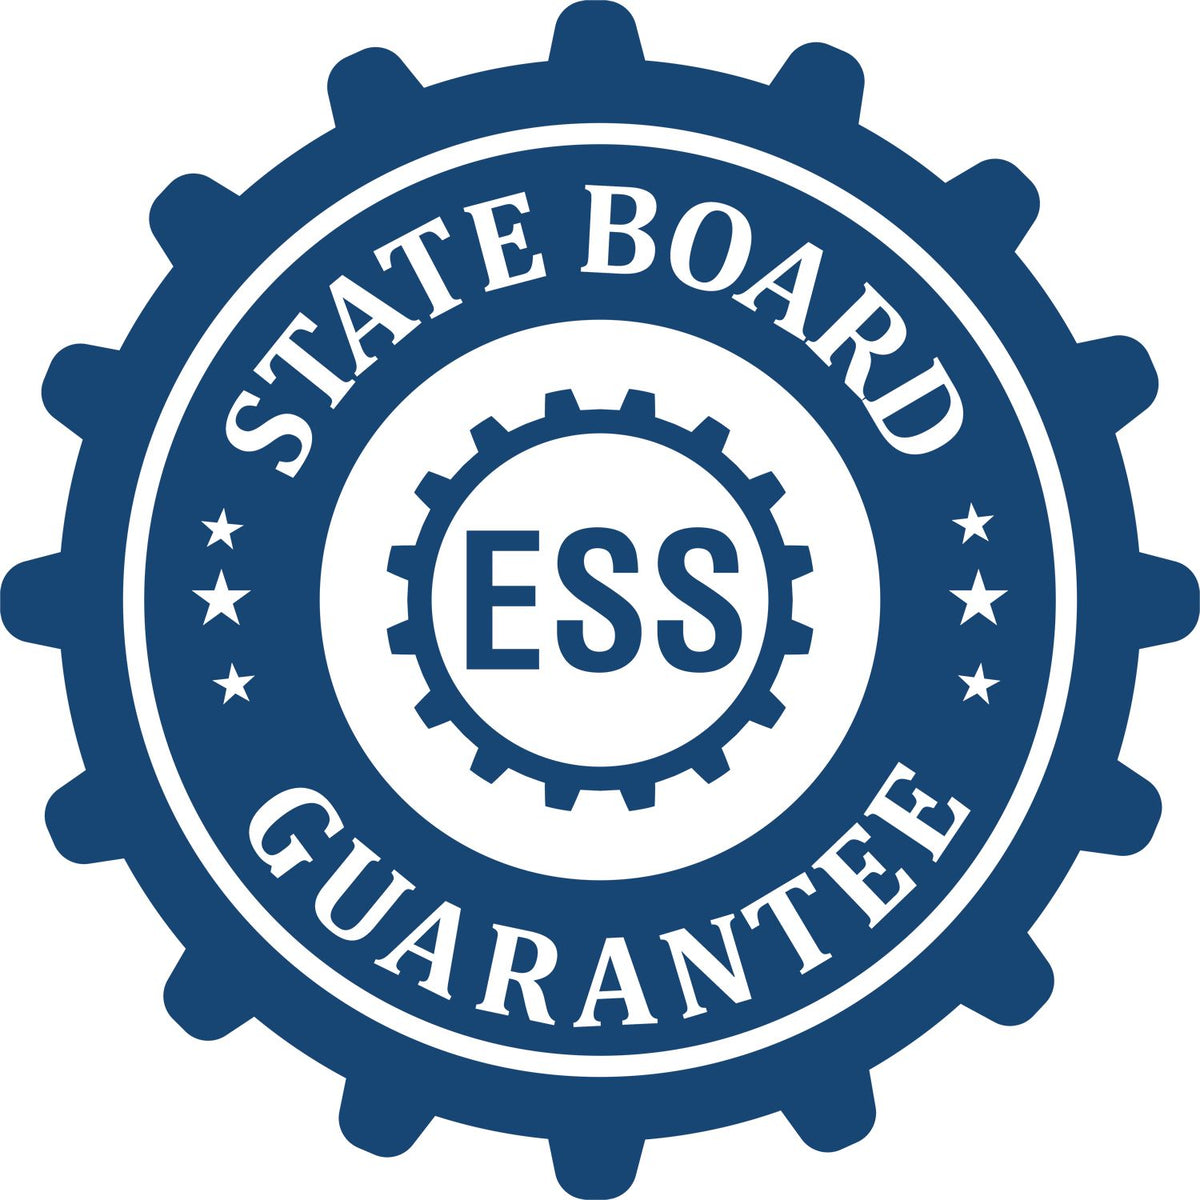 An emblem in a gear shape illustrating a state board guarantee for the Hybrid Ohio Landscape Architect Seal